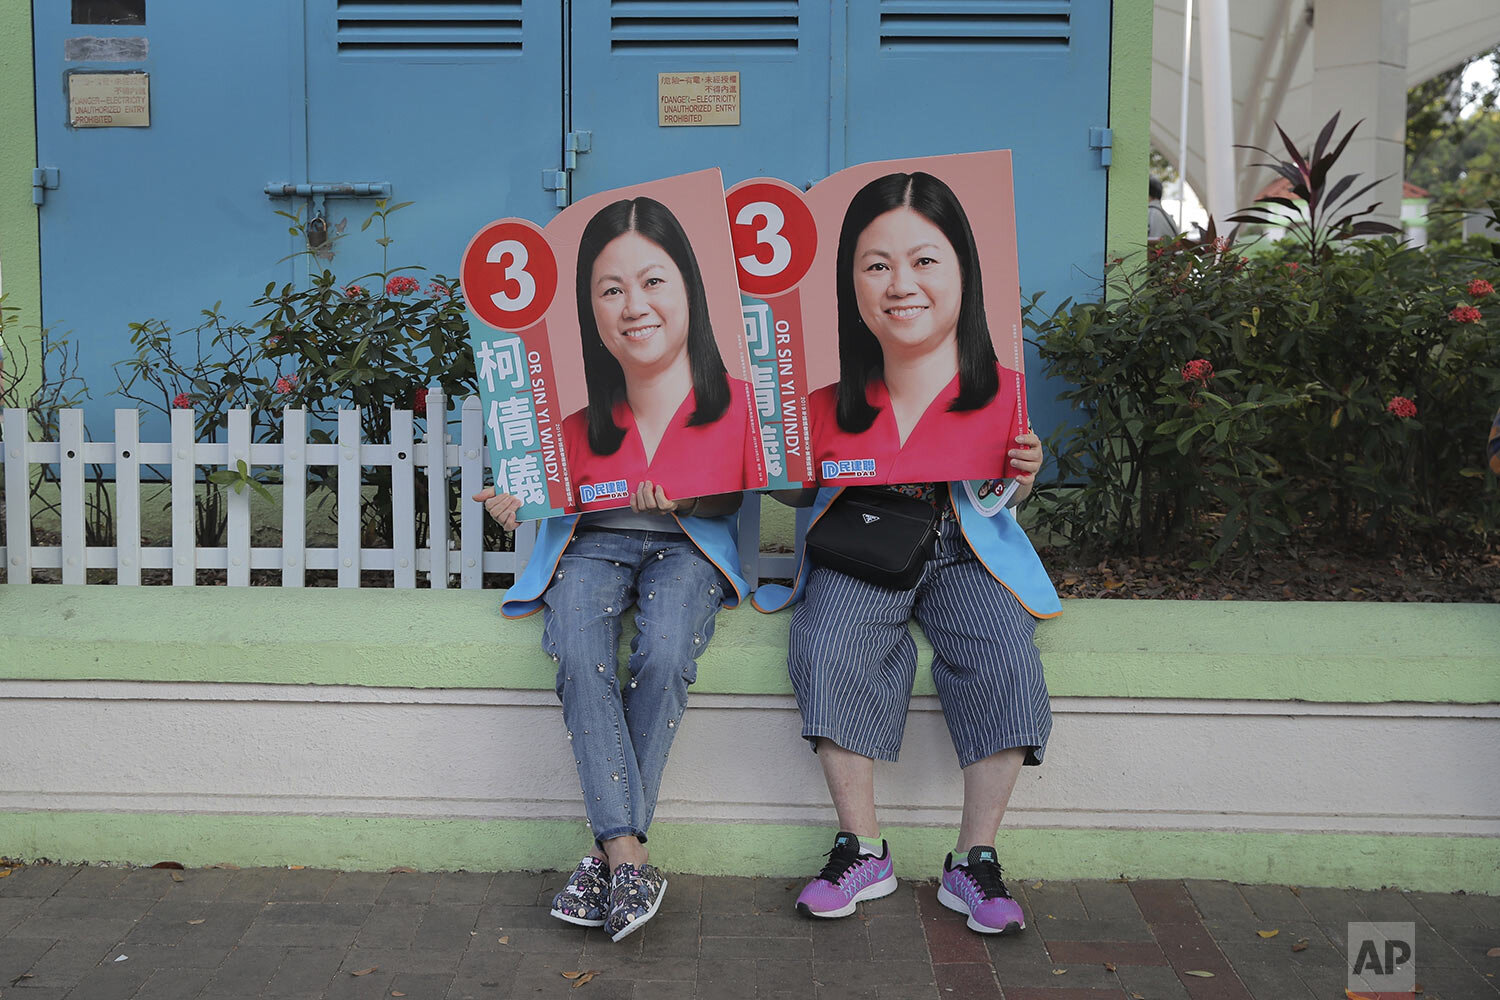  Supporters of pro China candidate Or Sin-yi Windy hold her promotional placards in Hong Kong, Sunday, Nov. 24, 2019. (AP Photo/Kin Cheung) 